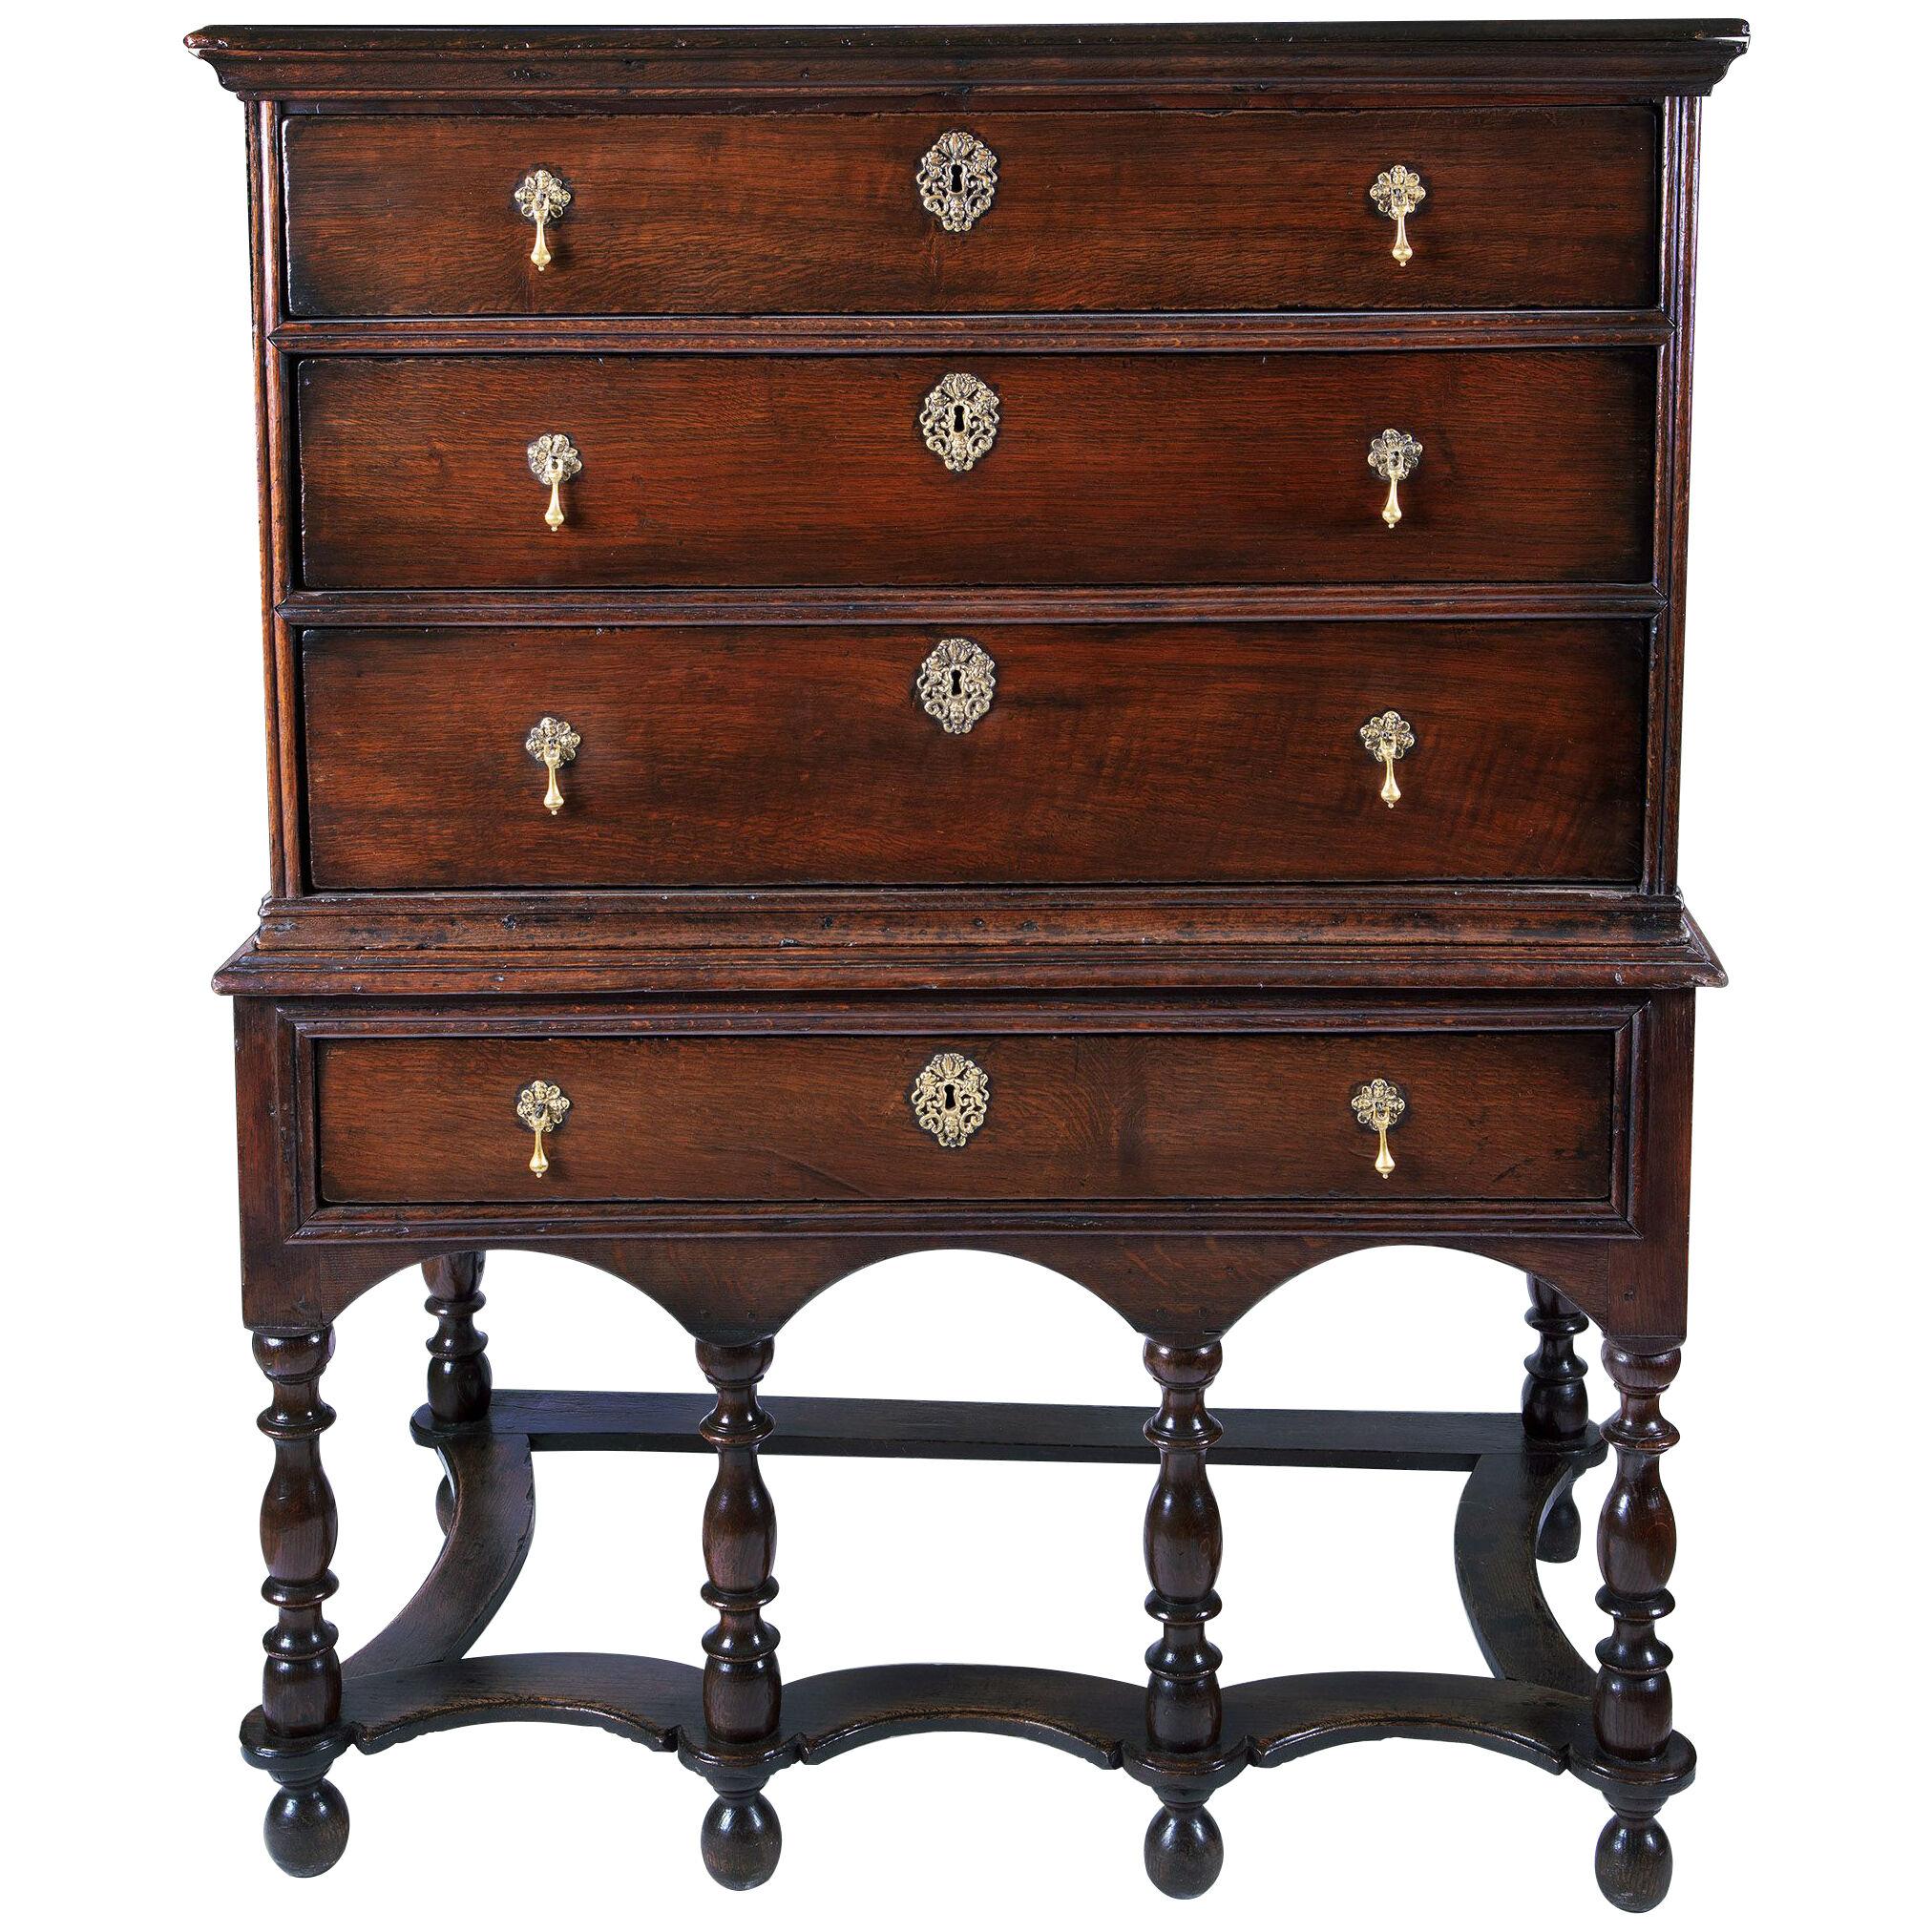 An early 18th century oak chest on stand